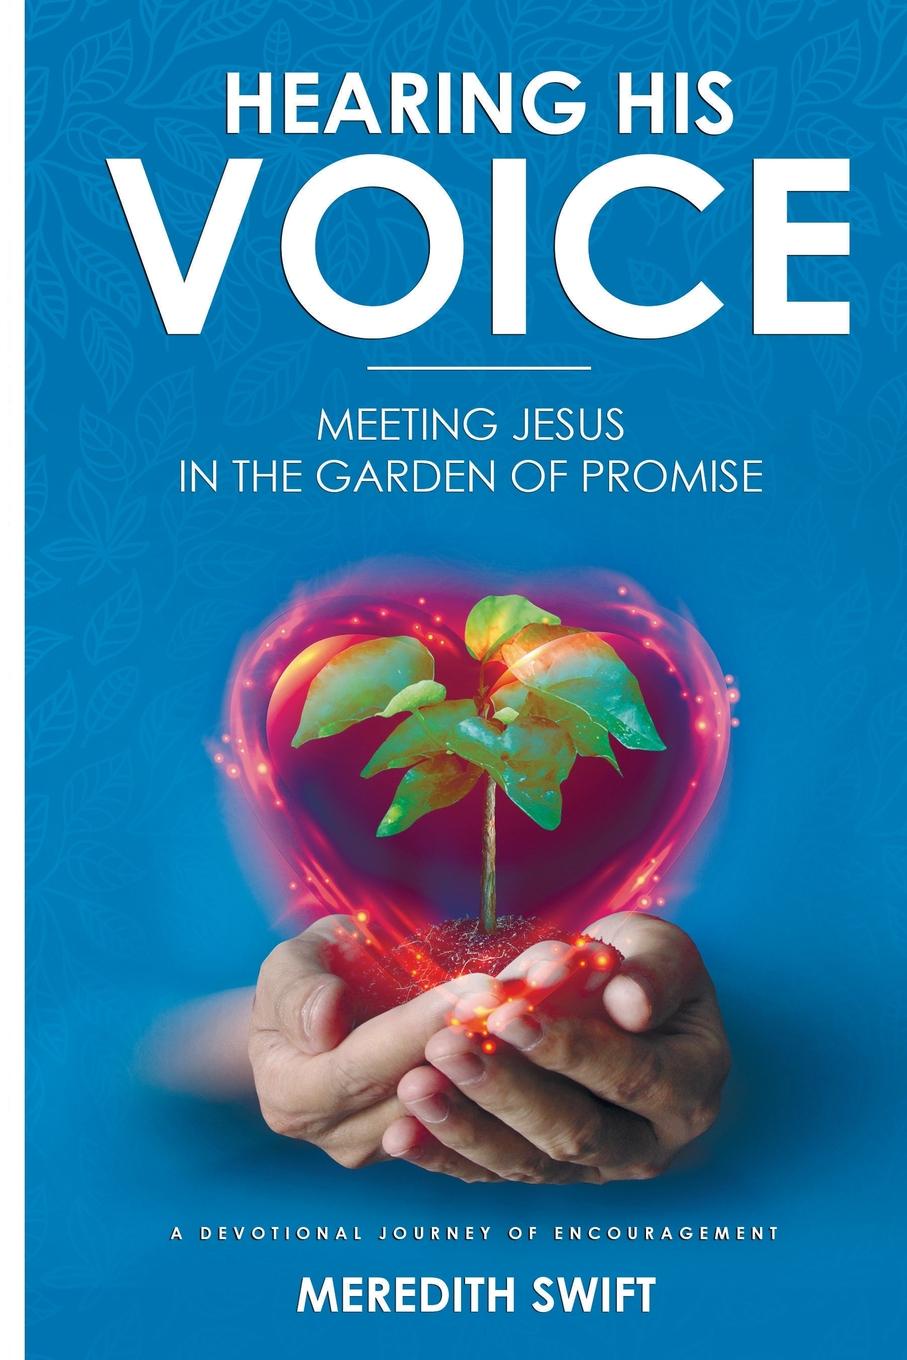 Hearing His Voice. Meeting Jesus in the Garden of Promise